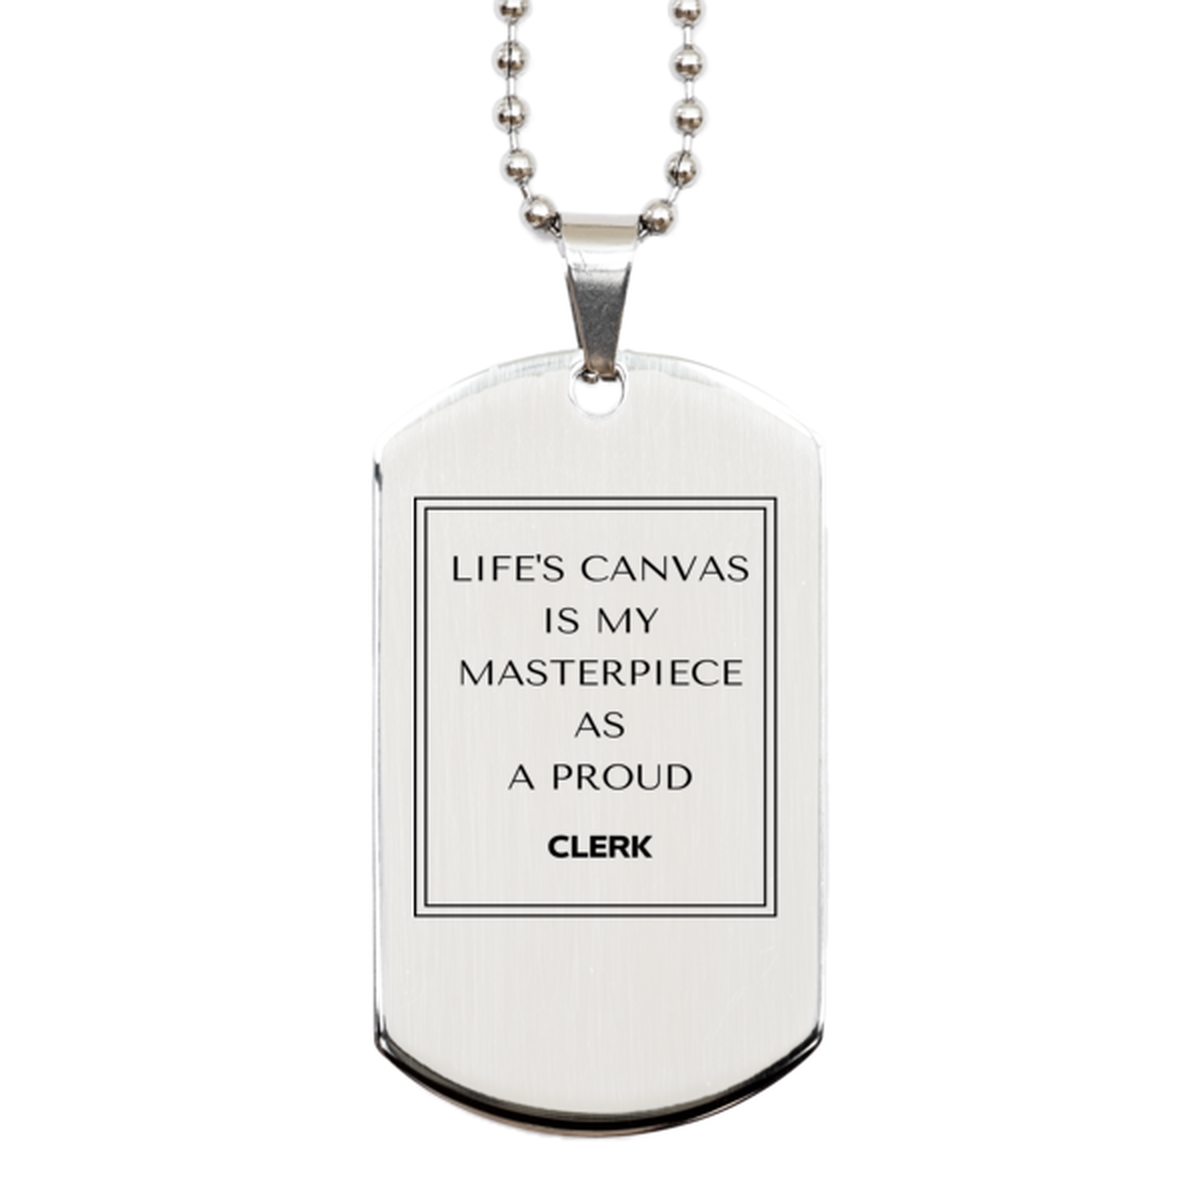 Proud Clerk Gifts, Life's canvas is my masterpiece, Epic Birthday Christmas Unique Silver Dog Tag For Clerk, Coworkers, Men, Women, Friends